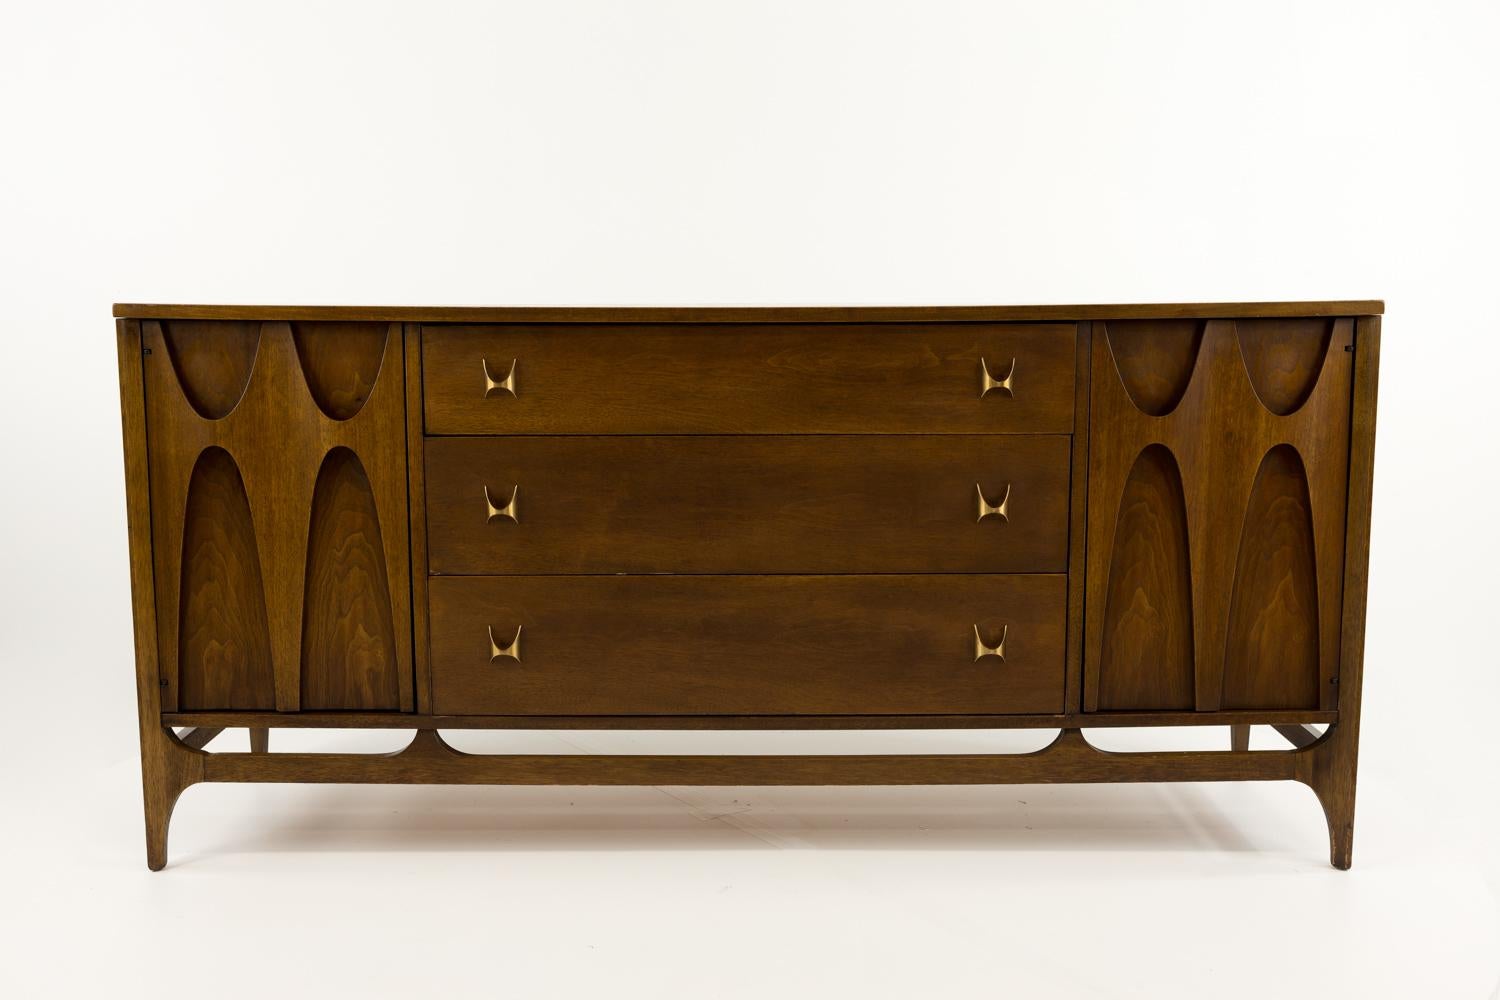 Broyhill Brasilia mid century sideboard buffet credenza
This credenza is: 66 wide x 19 deep x 30.75 inches high

All pieces of furniture can be had in what we call restored vintage condition. That means the piece is restored upon purchase so it’s